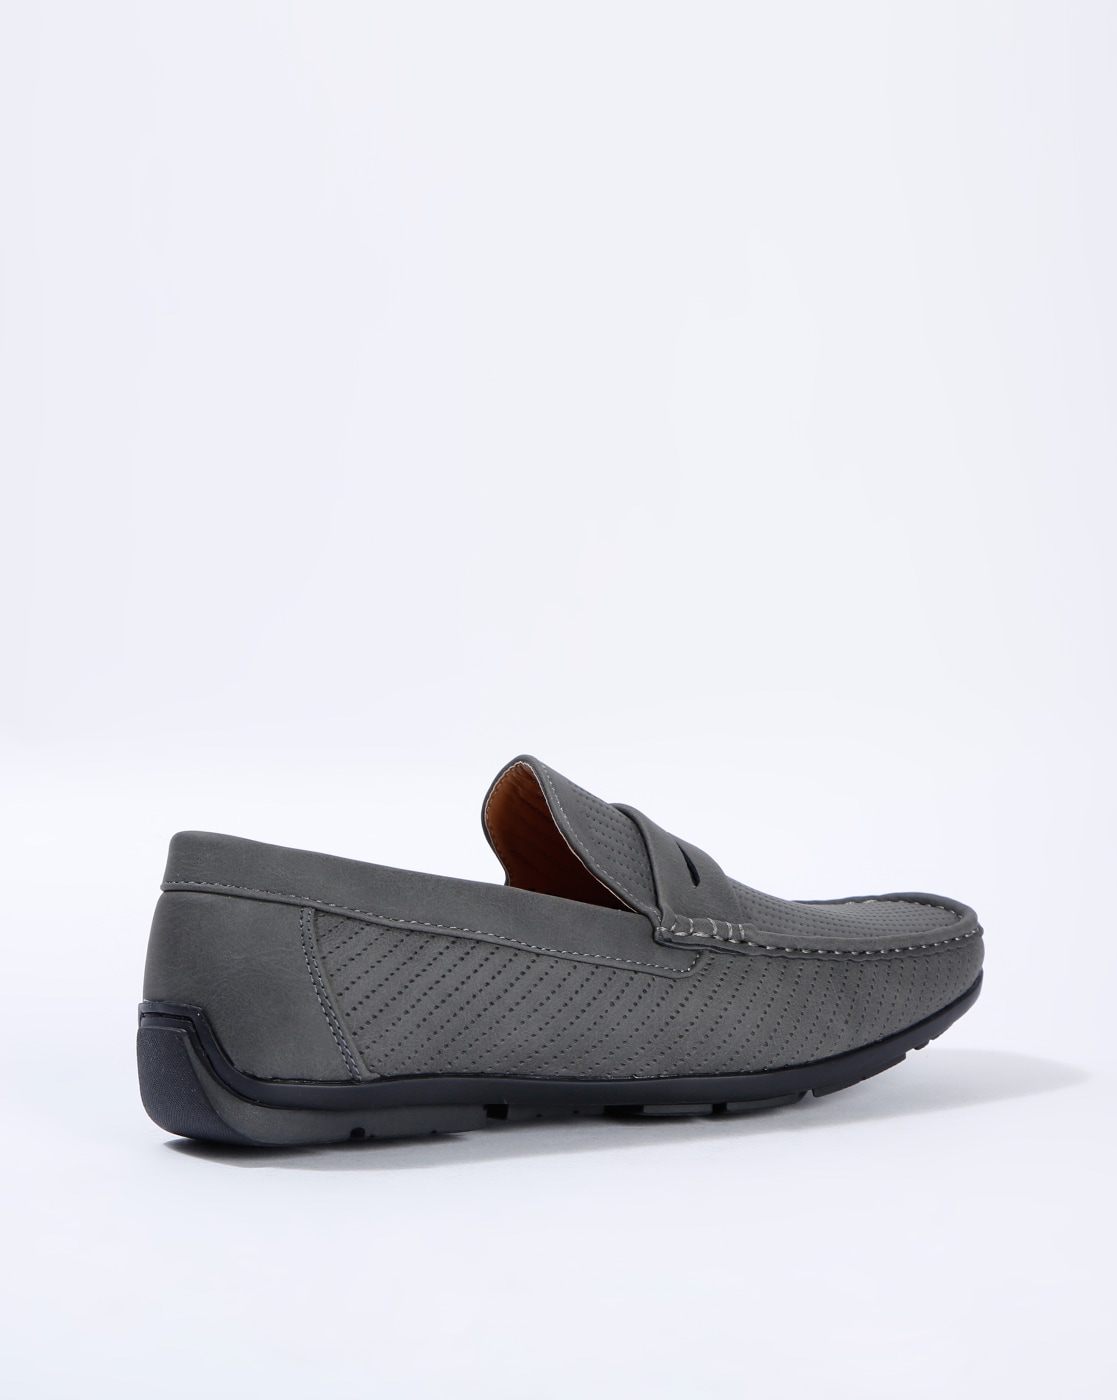 ajio loafer shoes